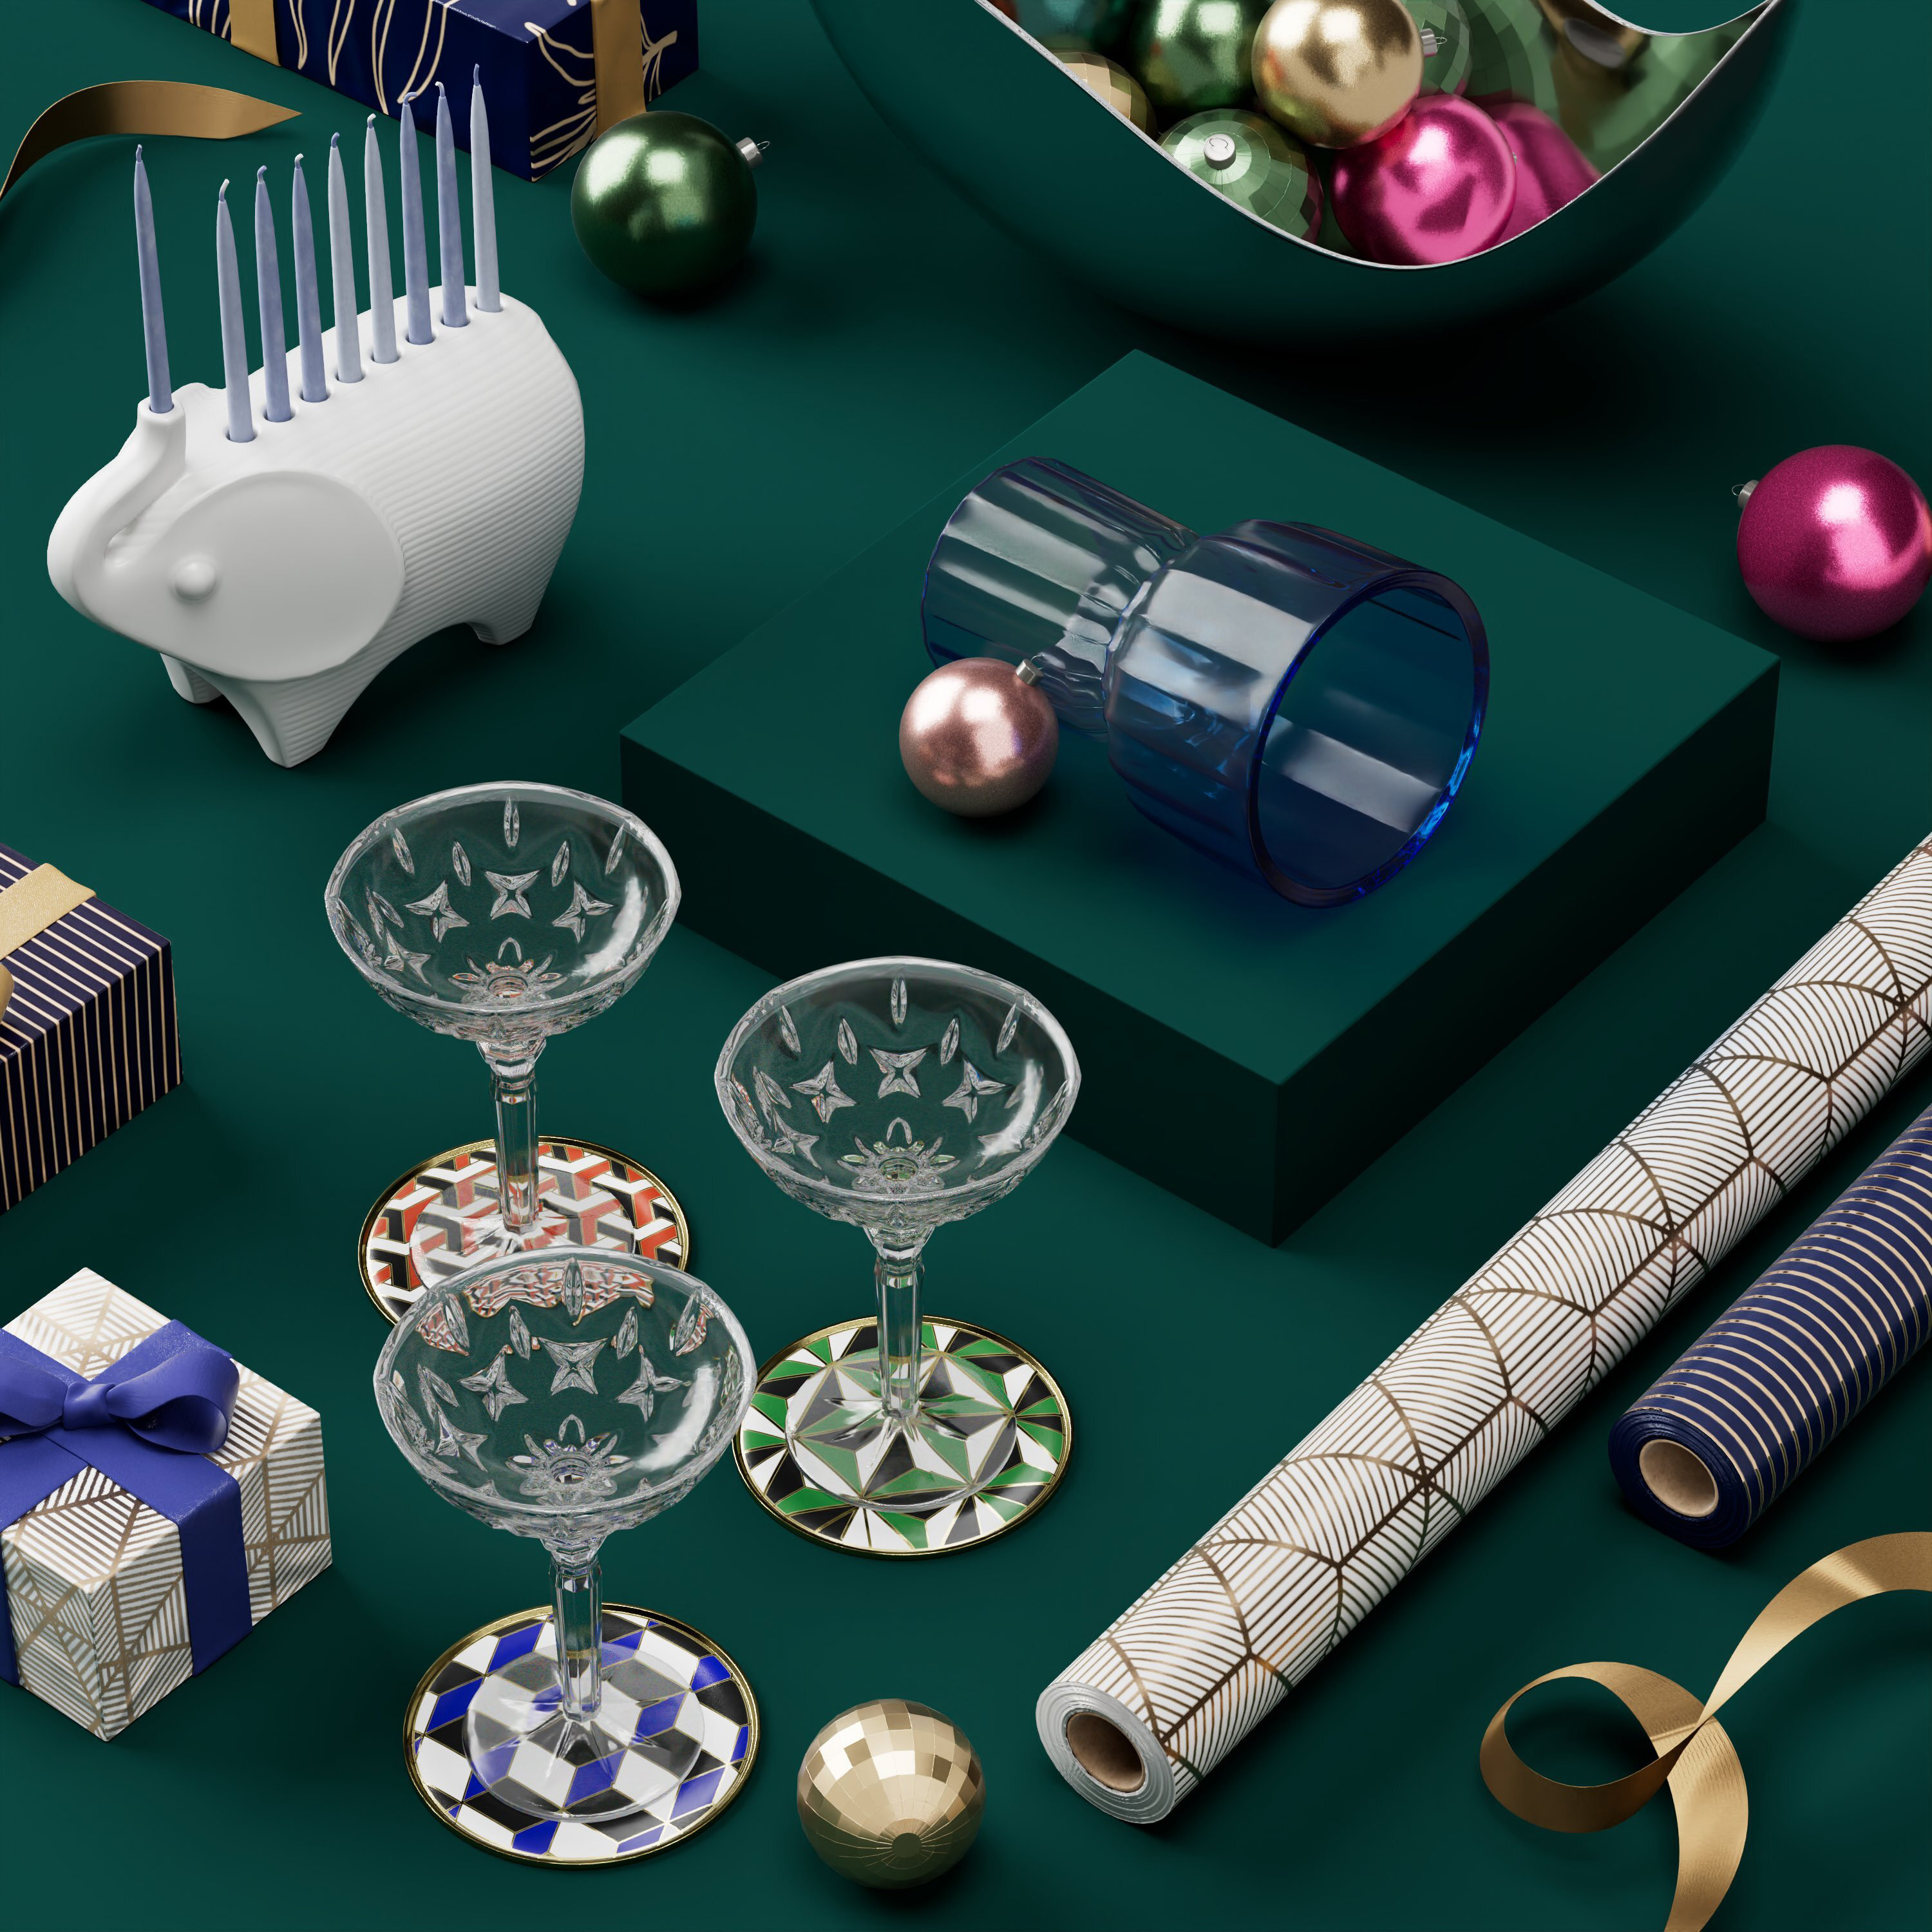 I composed, rendered, and did the lighting for this lifestyle image based off of art direction and concepts from the initial design deck. A few of the props were made by me. I created the blue vase from scratch the materials on the presents